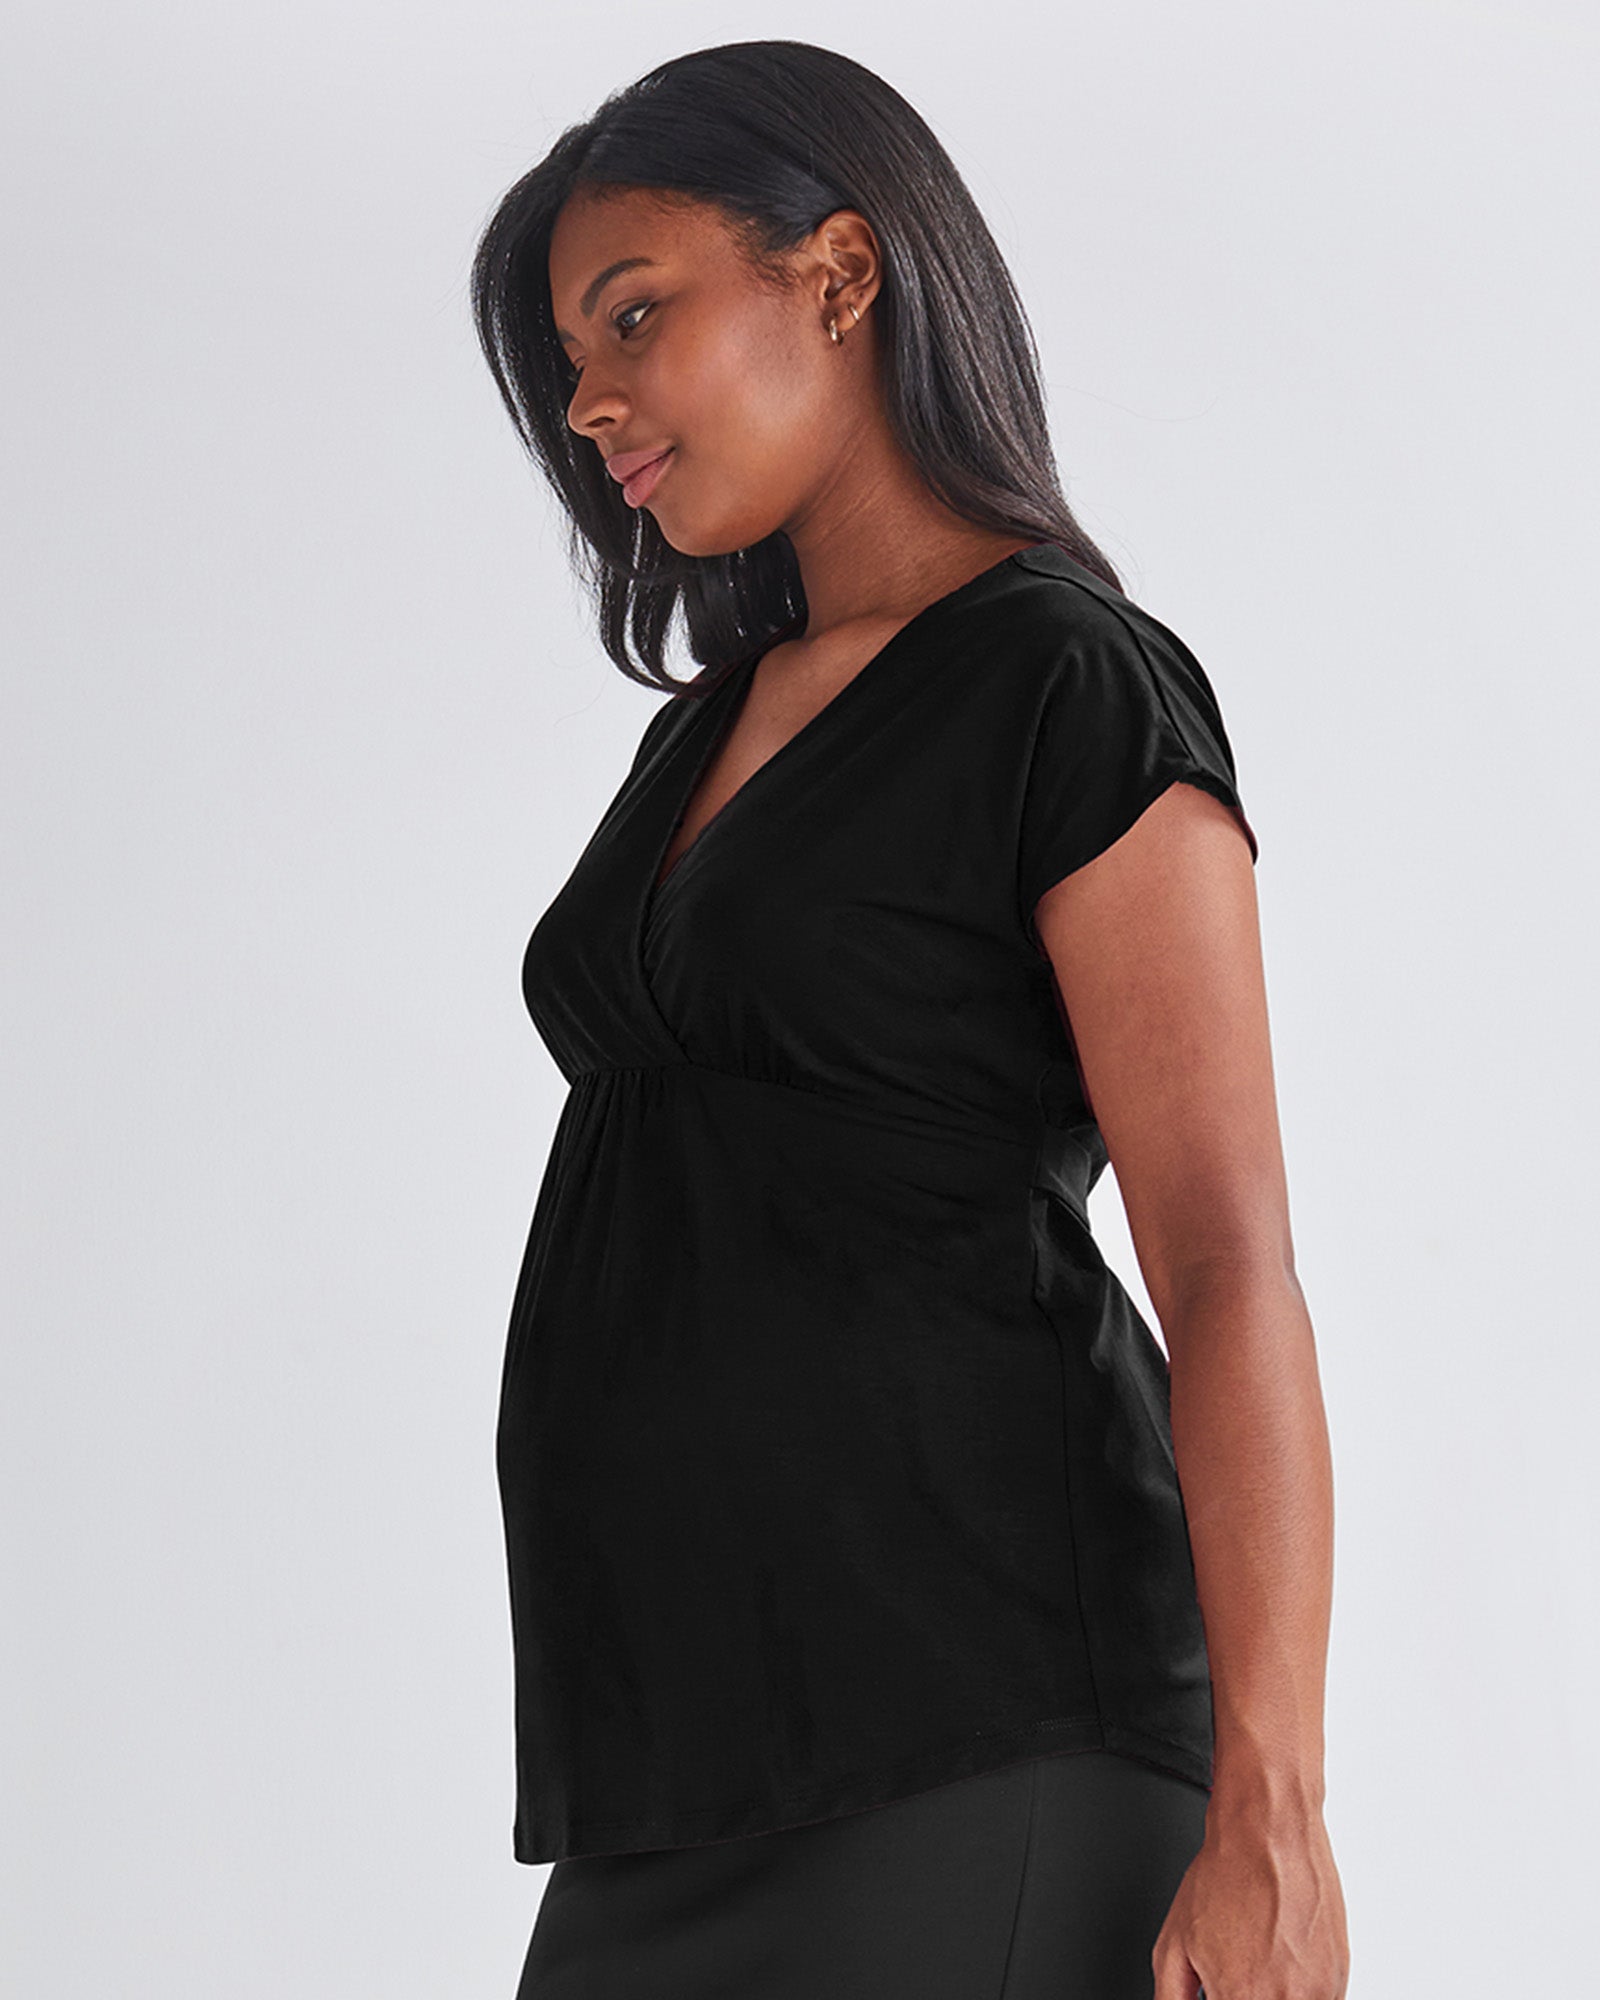 Main view-Nursing friendly cross Over style Stretchy, no-iron fabric Versatile waist belt from Angel Maternity